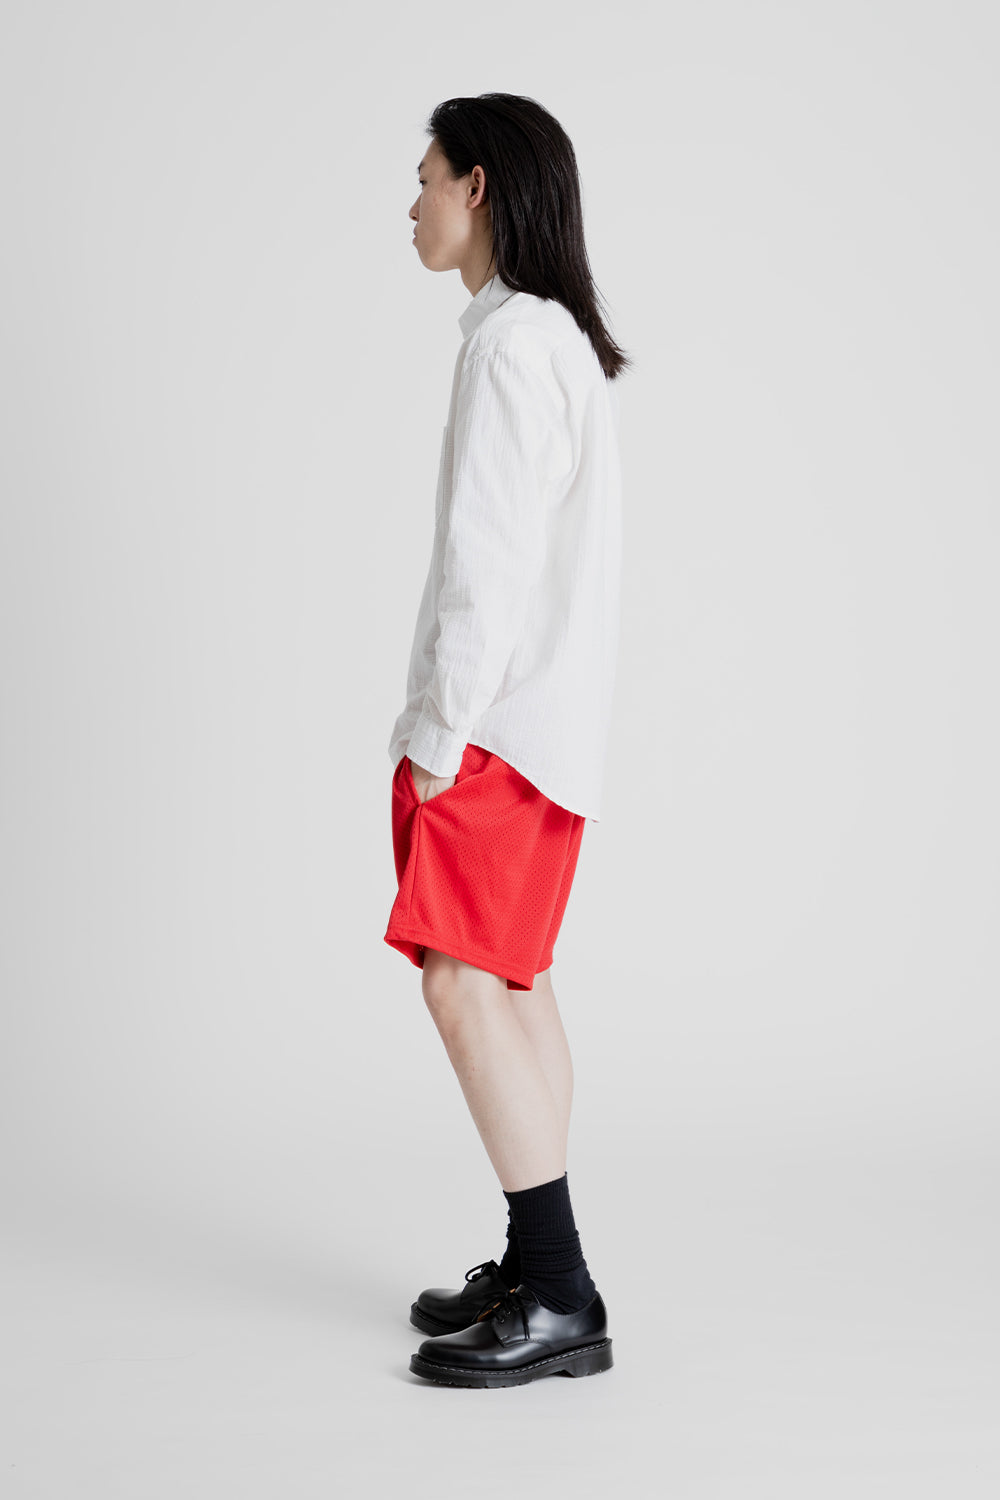 American_Trench_Short_Red